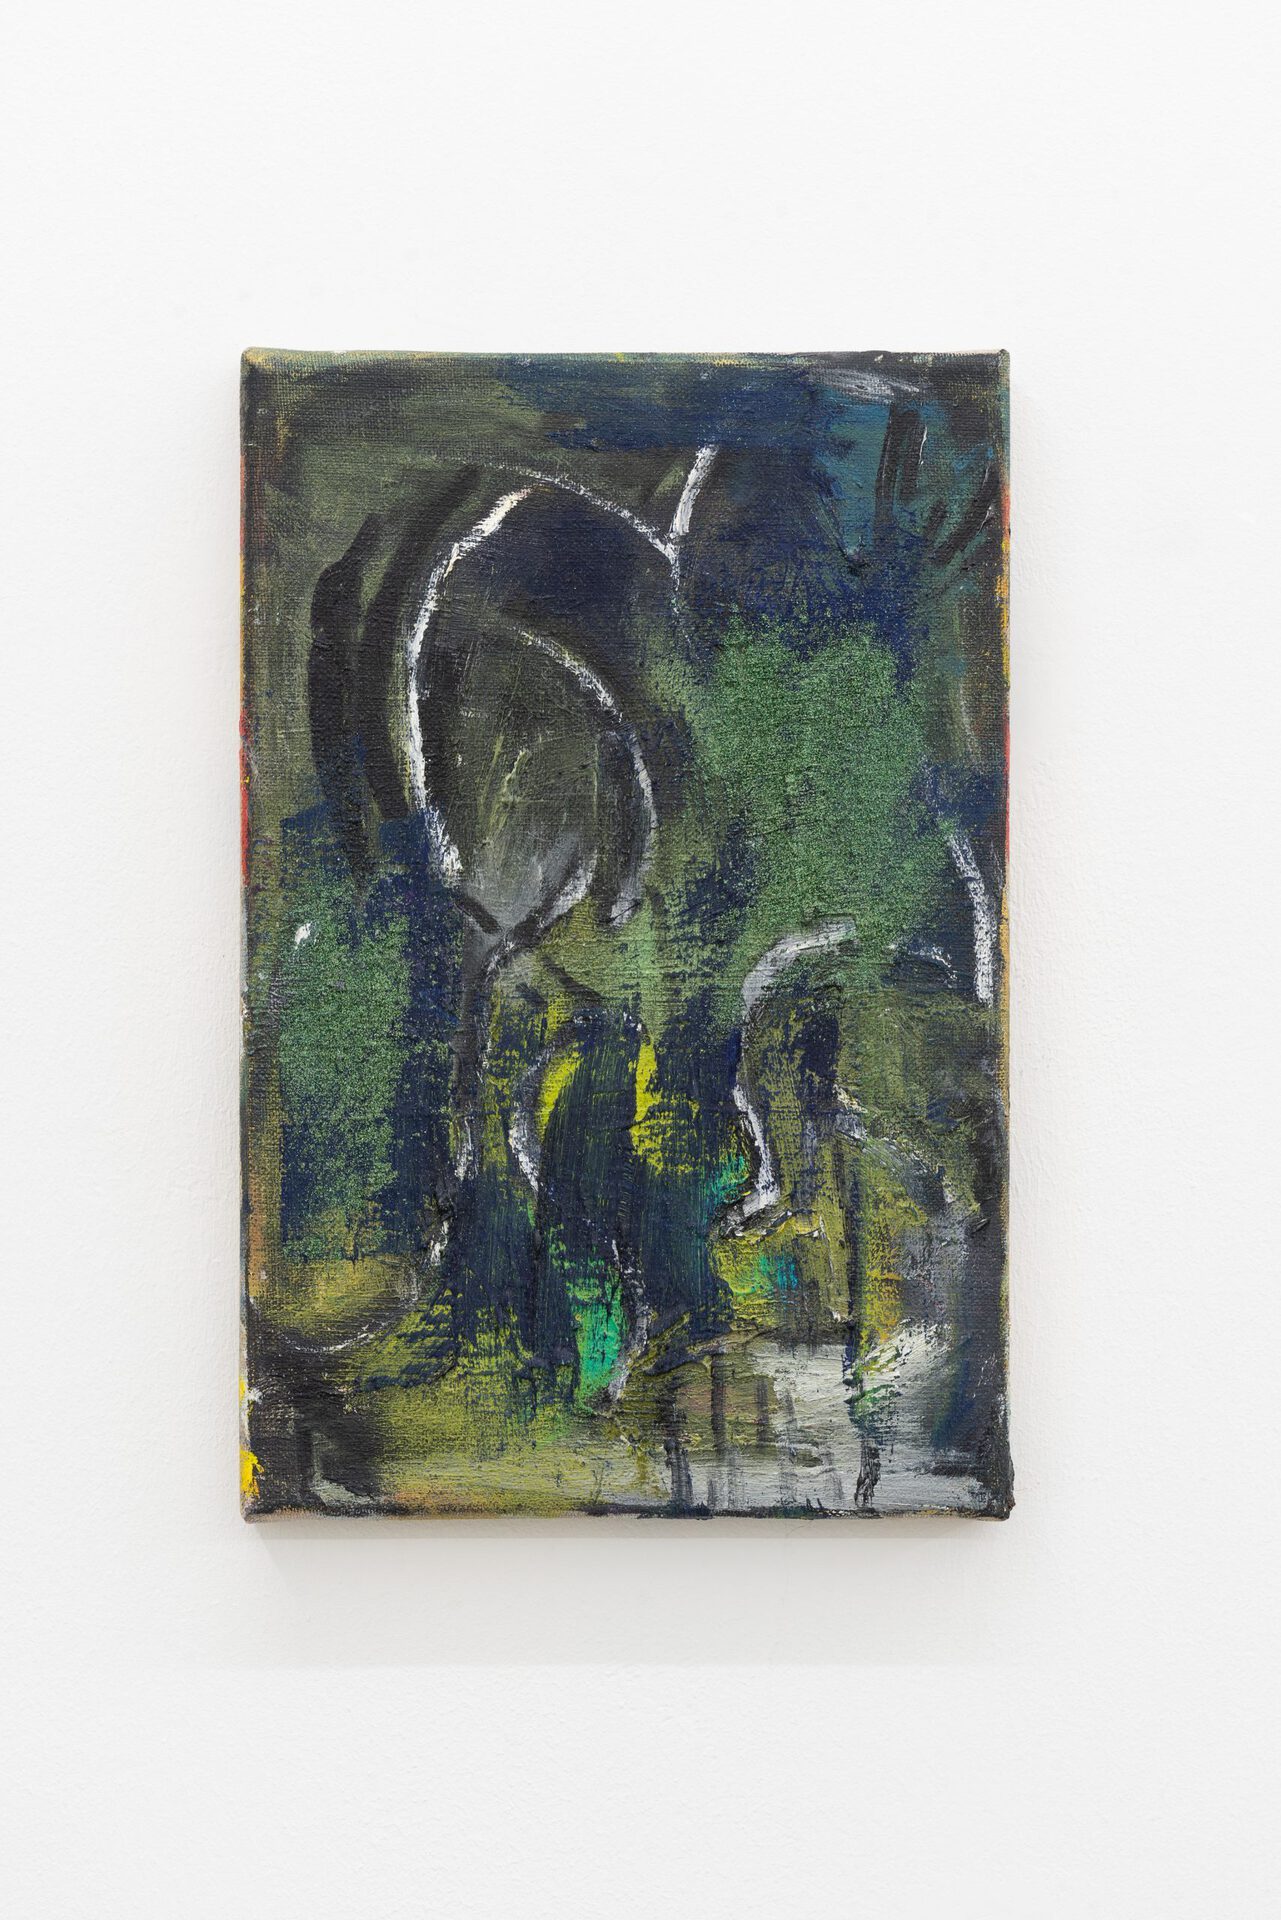 Anne Fellner, Green-eyed, burnt-out and lost, 2019, pigment and oil on linen, 30 × 20 cm